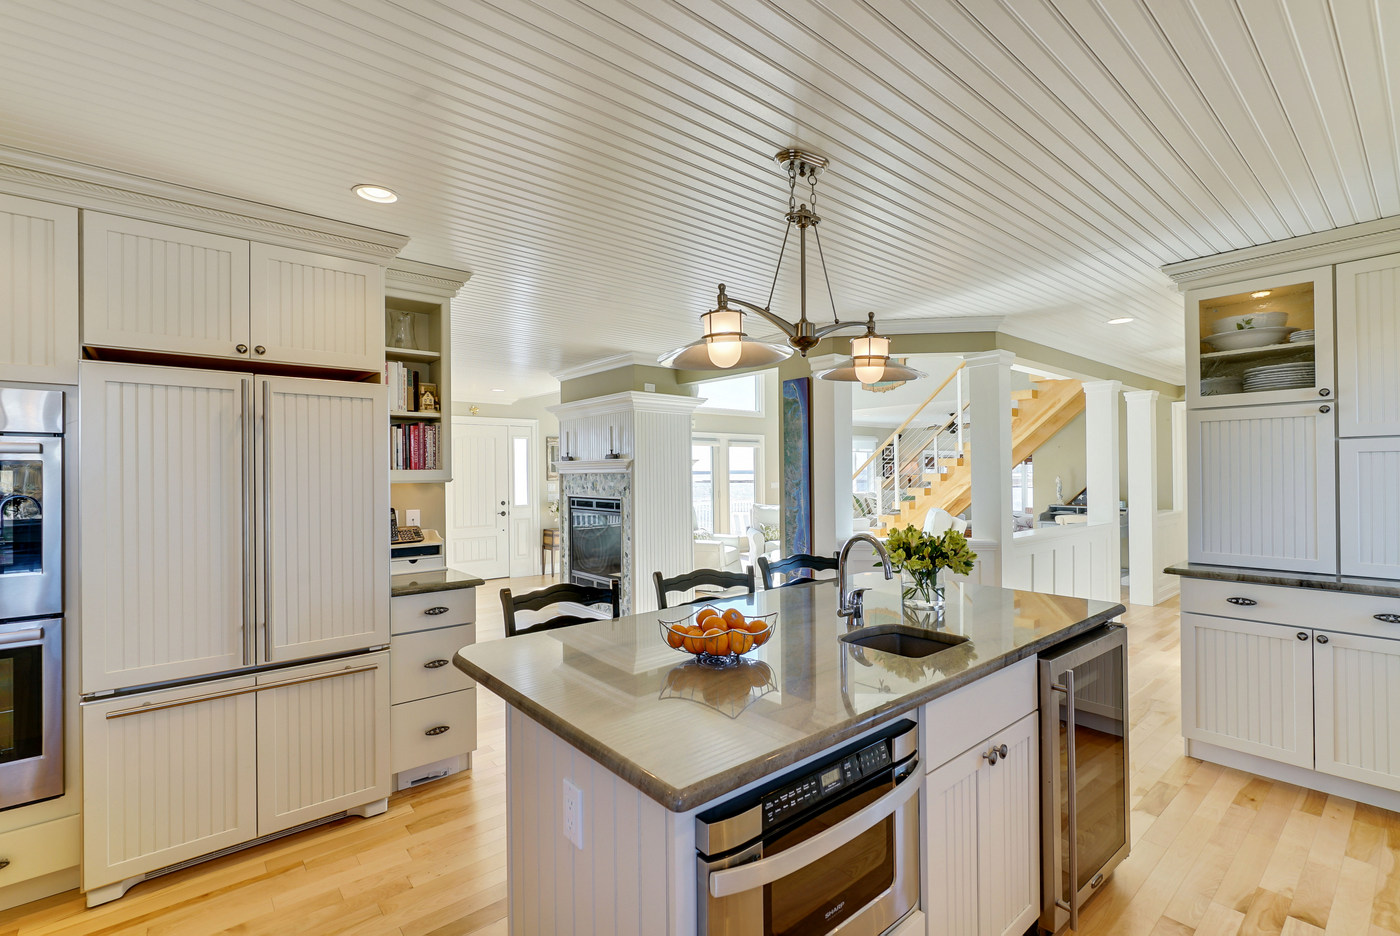 Details are Important in Kitchen Renovations: Here’s Why